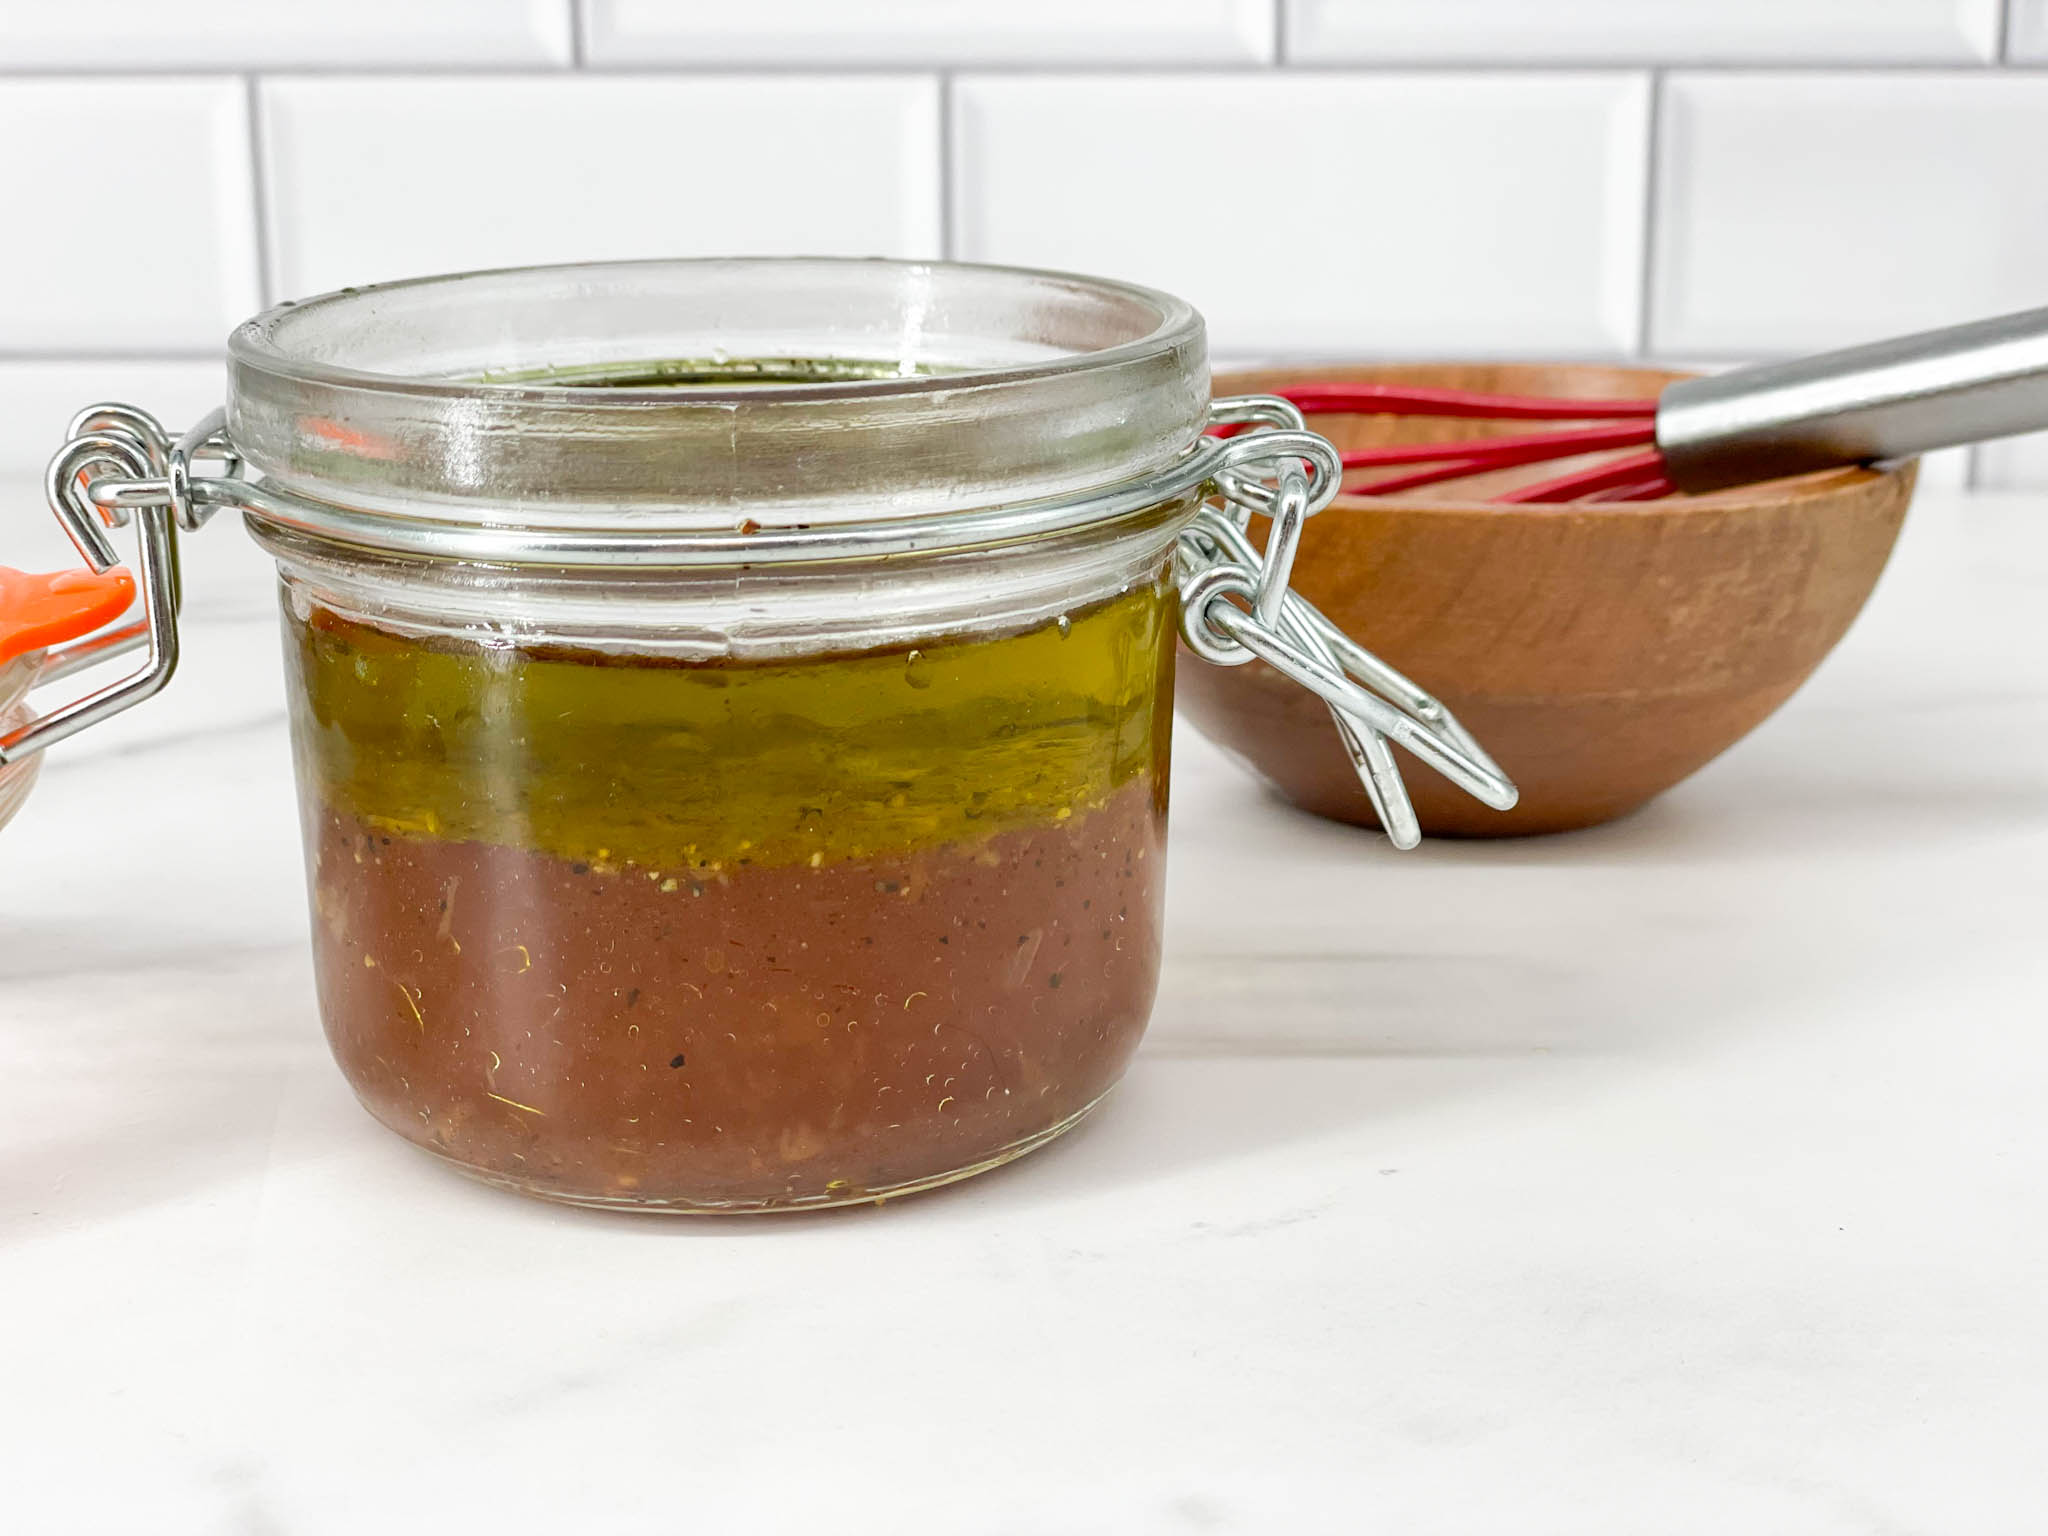 A vinaigrette made with olive oil, red wine vinegar and seasoning for a fresh salad.